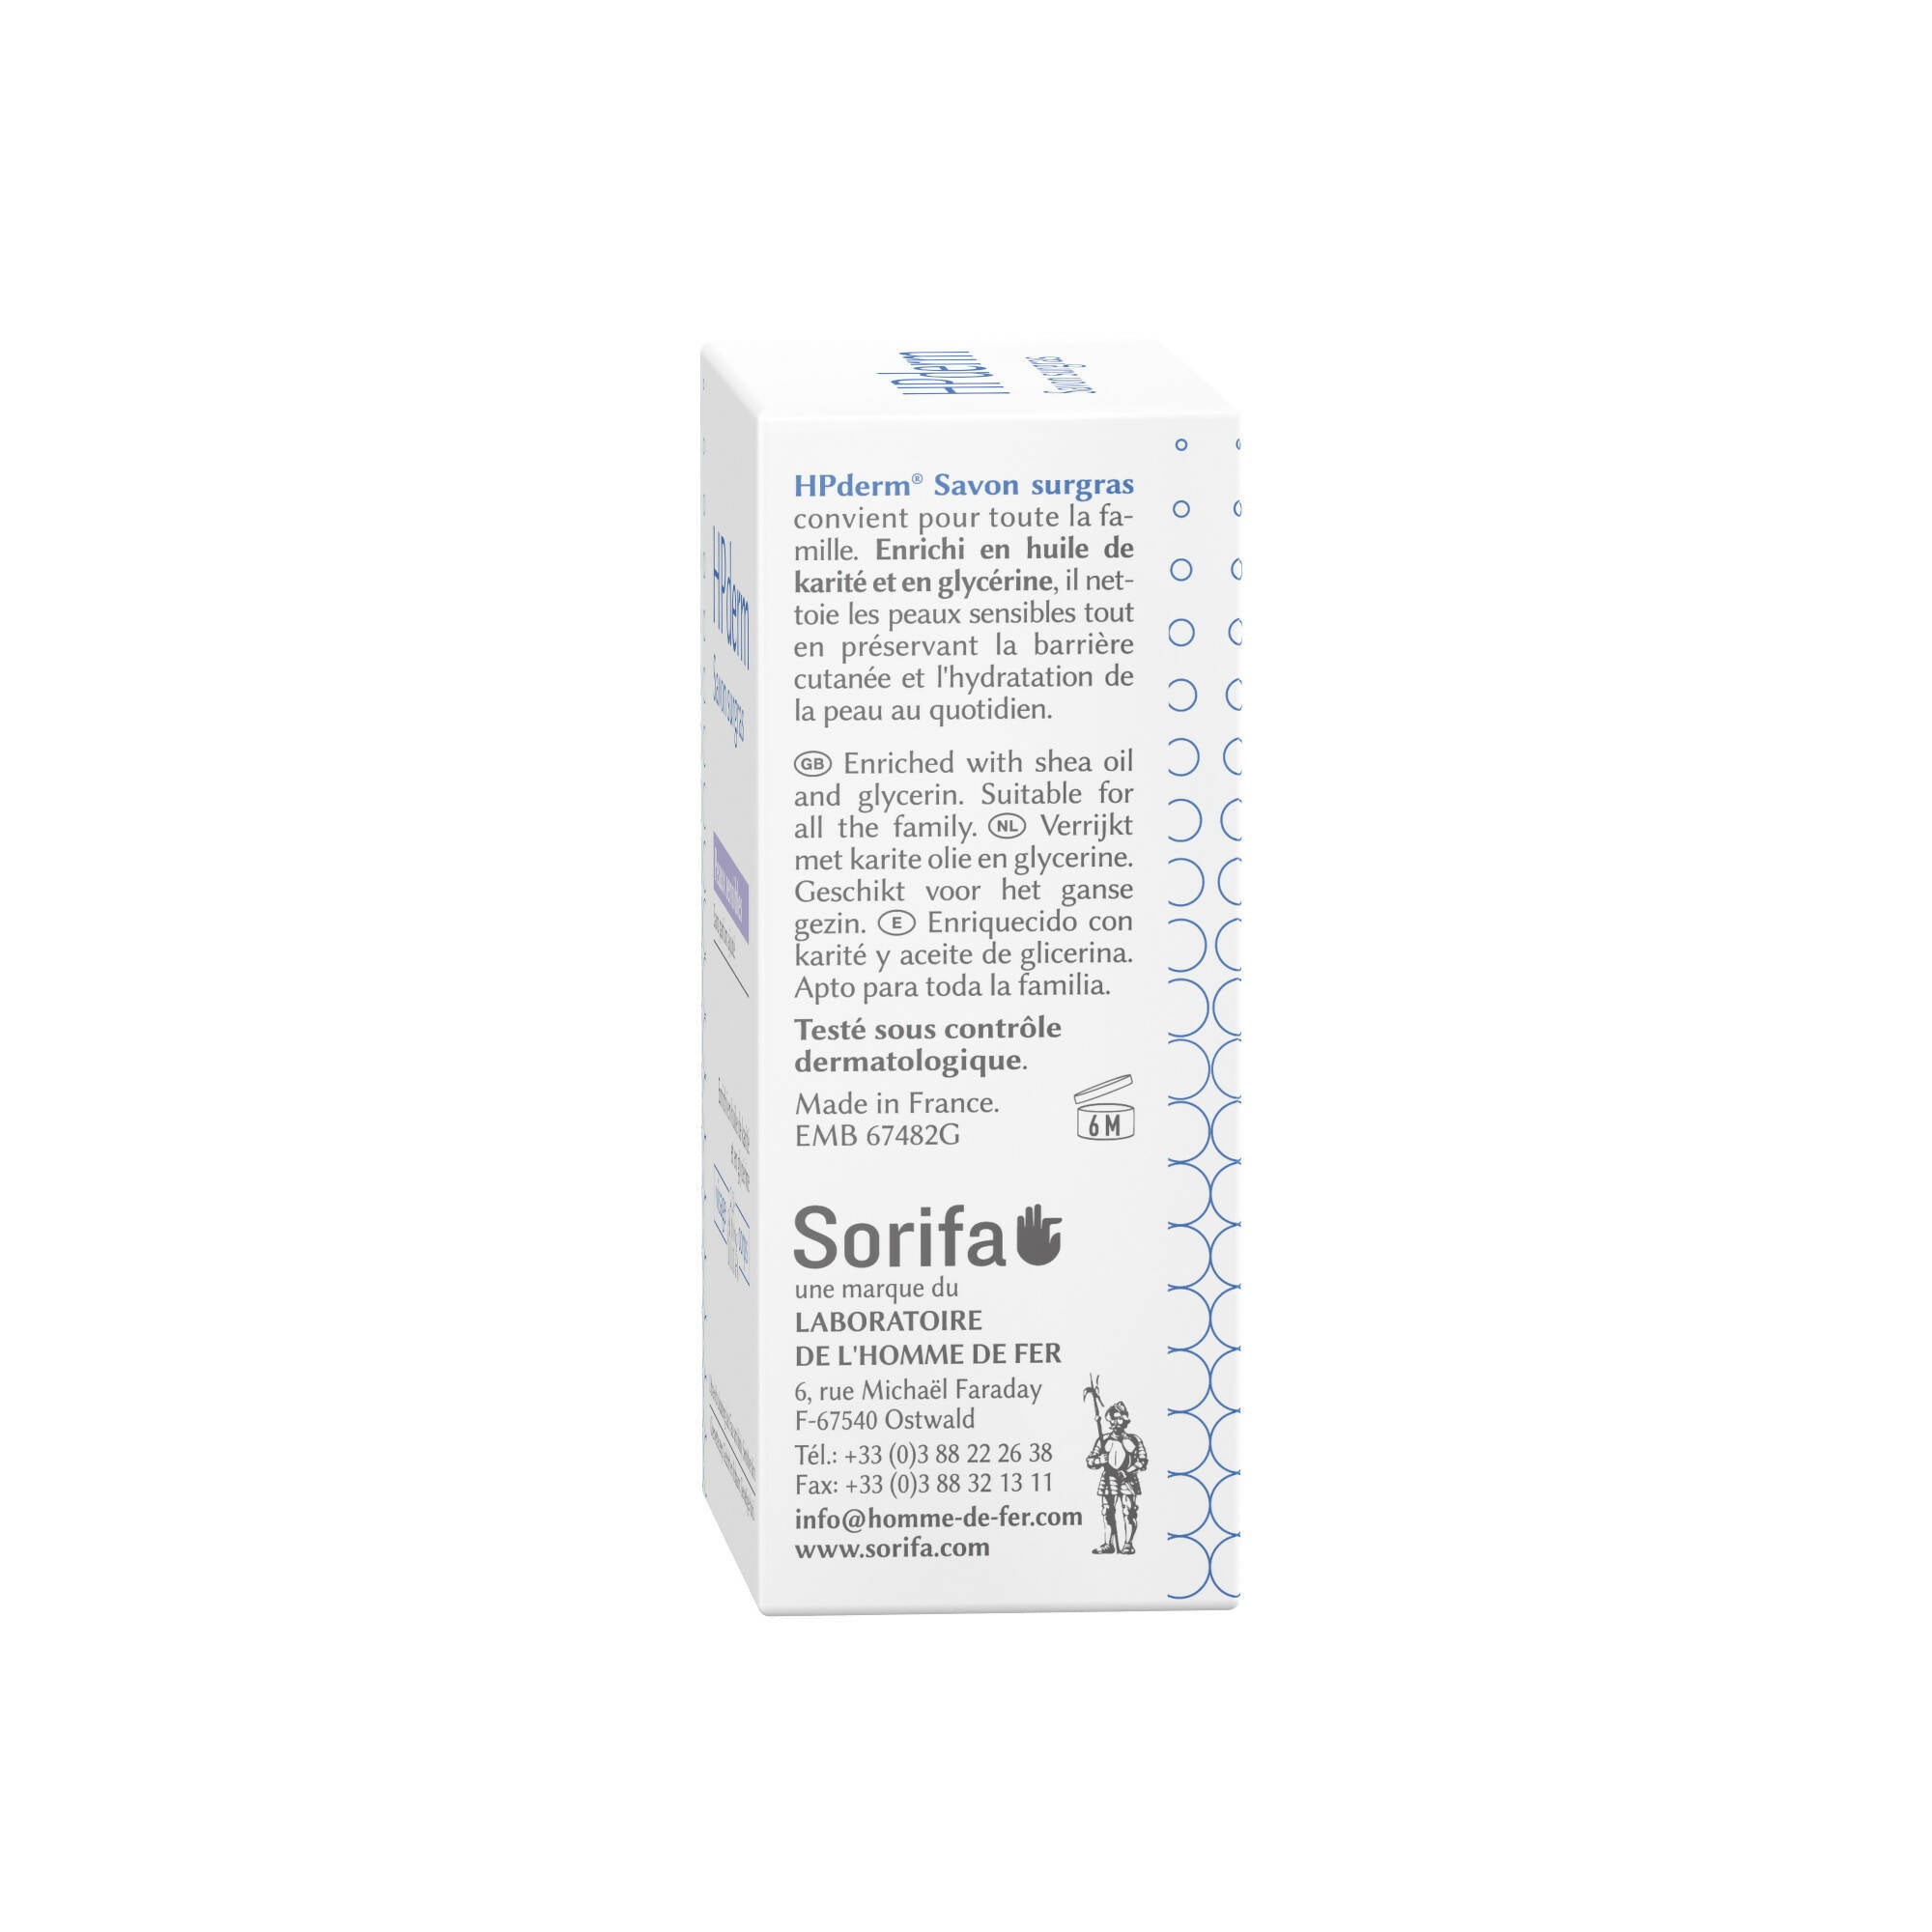 SORIFA - Complete box of 24 - HPderm Surgras soap - Sensitive skin - 99.95% natural ingredients - Enriched with shea oil and glycerin - Family including infants - Neutral pH, fragrance-free - Bar 150 gr